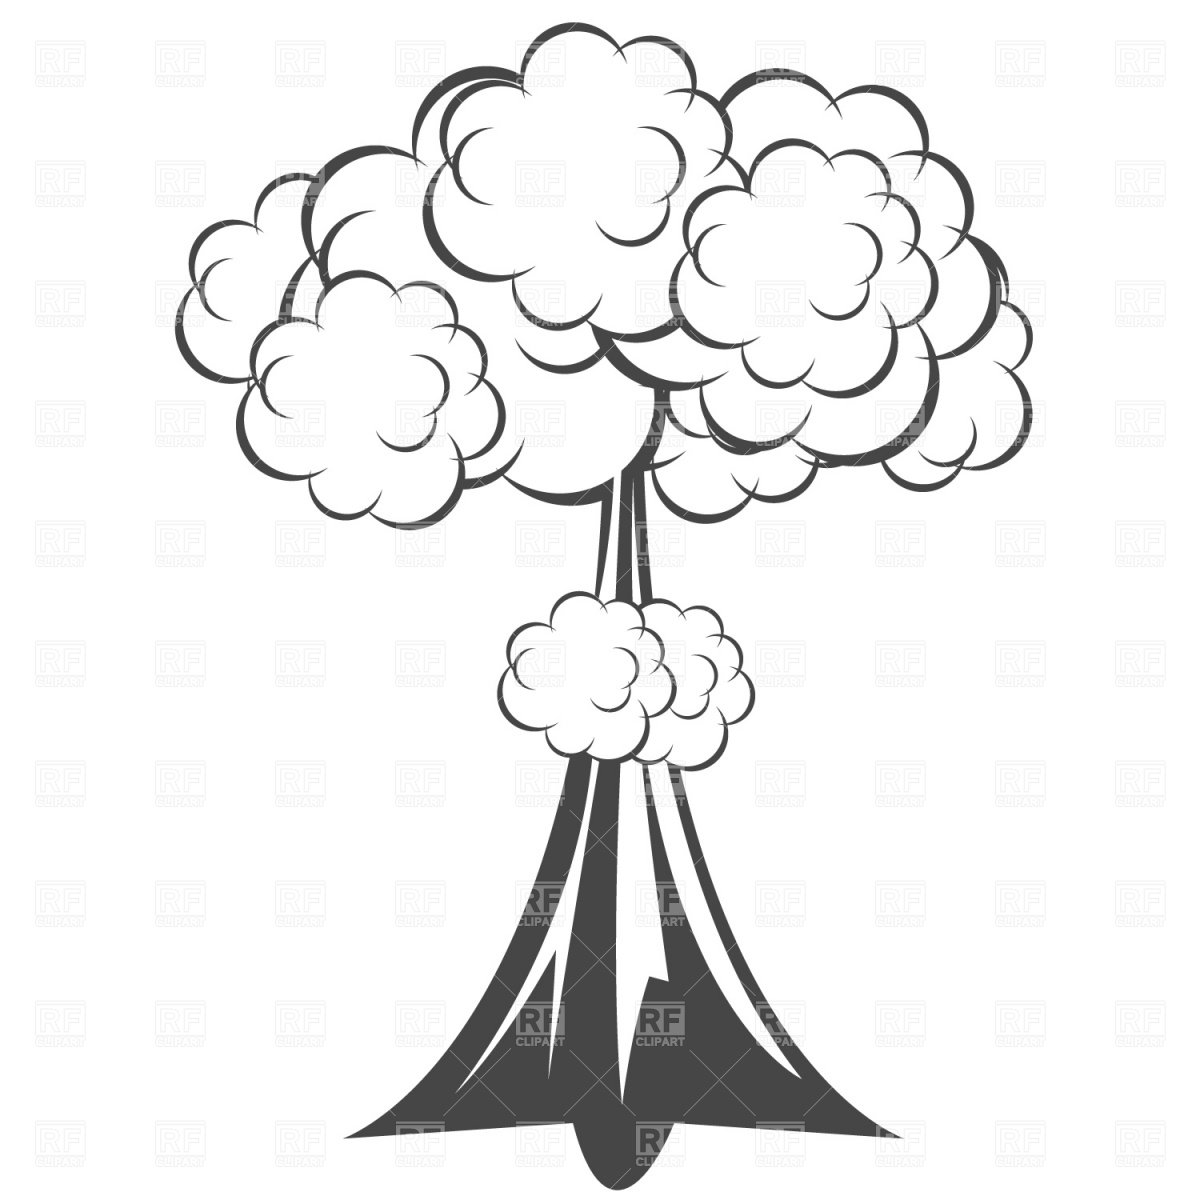 Blast With Mushroom Cloud Download Royalty Free Vector Clipart  Eps